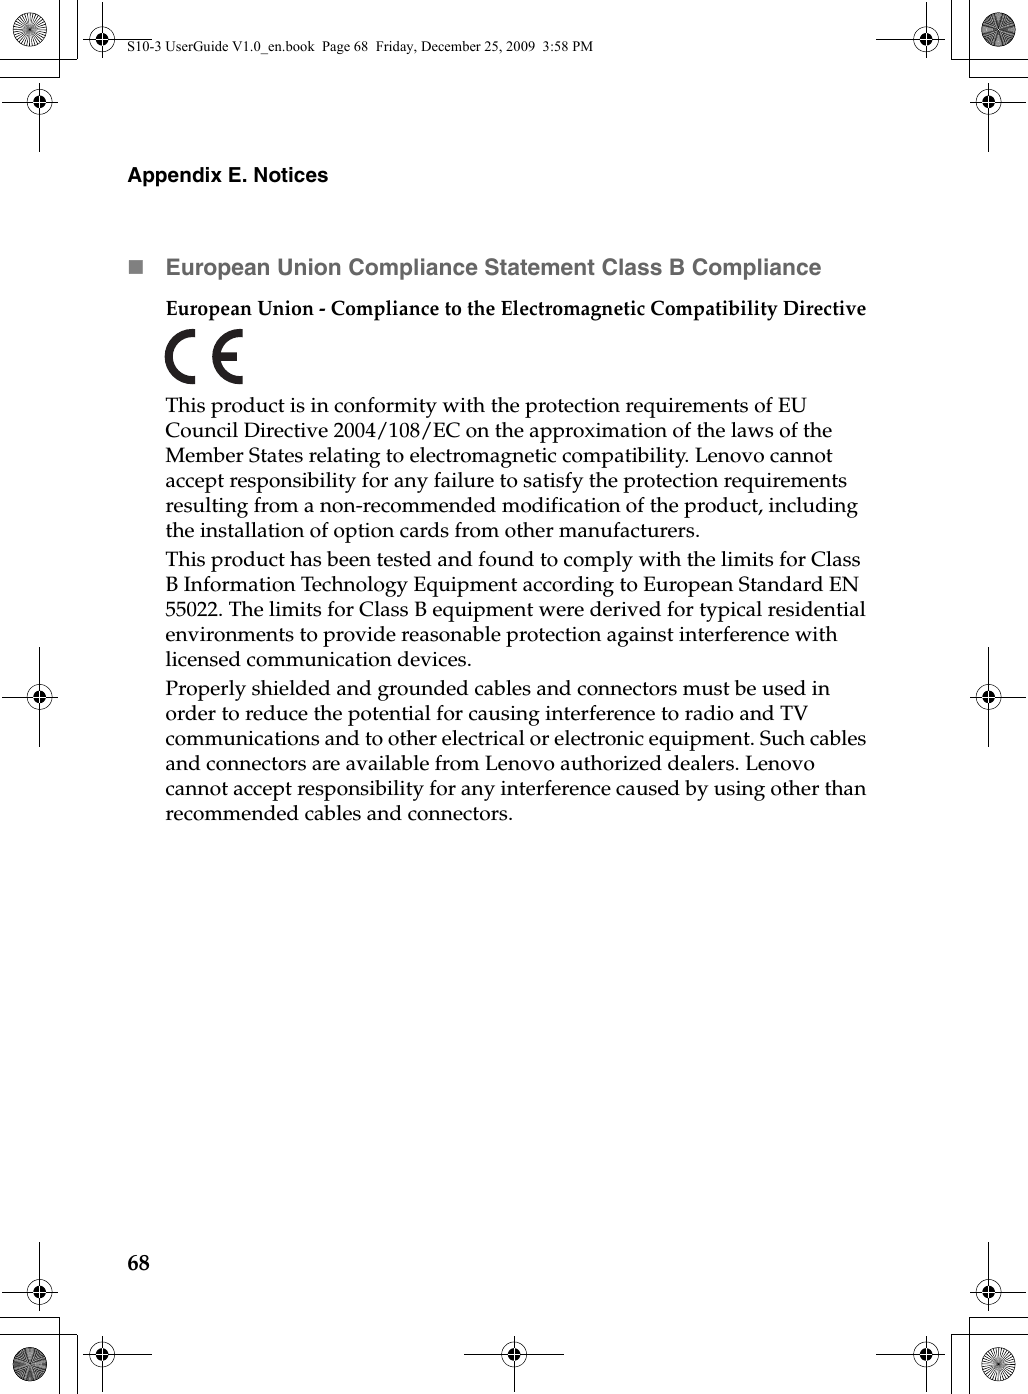 68Appendix E. NoticesEuropean Union Compliance Statement Class B ComplianceEuropean Union - Compliance to the Electromagnetic Compatibility DirectiveThis product is in conformity with the protection requirements of EU Council Directive 2004/108/EC on the approximation of the laws of the Member States relating to electromagnetic compatibility. Lenovo cannot accept responsibility for any failure to satisfy the protection requirements resulting from a non-recommended modification of the product, including the installation of option cards from other manufacturers. This product has been tested and found to comply with the limits for Class B Information Technology Equipment according to European Standard EN 55022. The limits for Class B equipment were derived for typical residential environments to provide reasonable protection against interference with licensed communication devices.Properly shielded and grounded cables and connectors must be used in order to reduce the potential for causing interference to radio and TV communications and to other electrical or electronic equipment. Such cables and connectors are available from Lenovo authorized dealers. Lenovo cannot accept responsibility for any interference caused by using other than recommended cables and connectors.S10-3 UserGuide V1.0_en.book  Page 68  Friday, December 25, 2009  3:58 PM